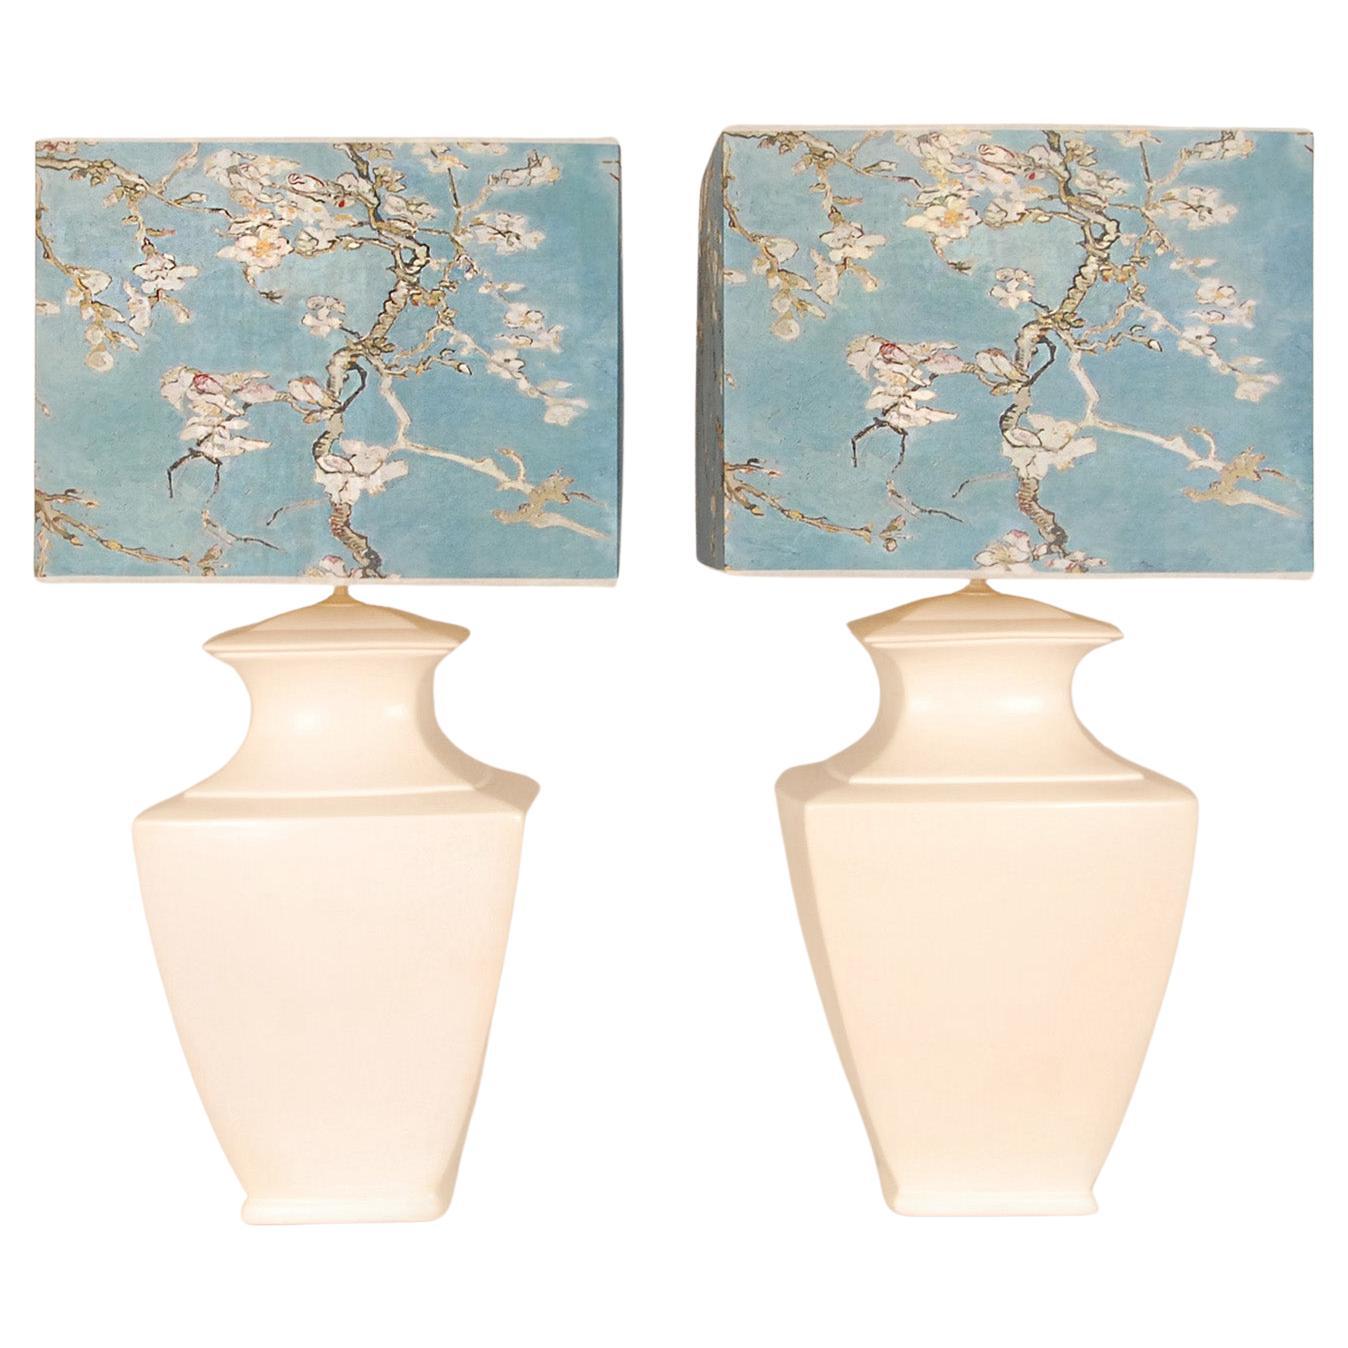 Vintage Ceramic Lamps Tall Modern Square blue White Chinoiserie Table Lamps pair For Sale